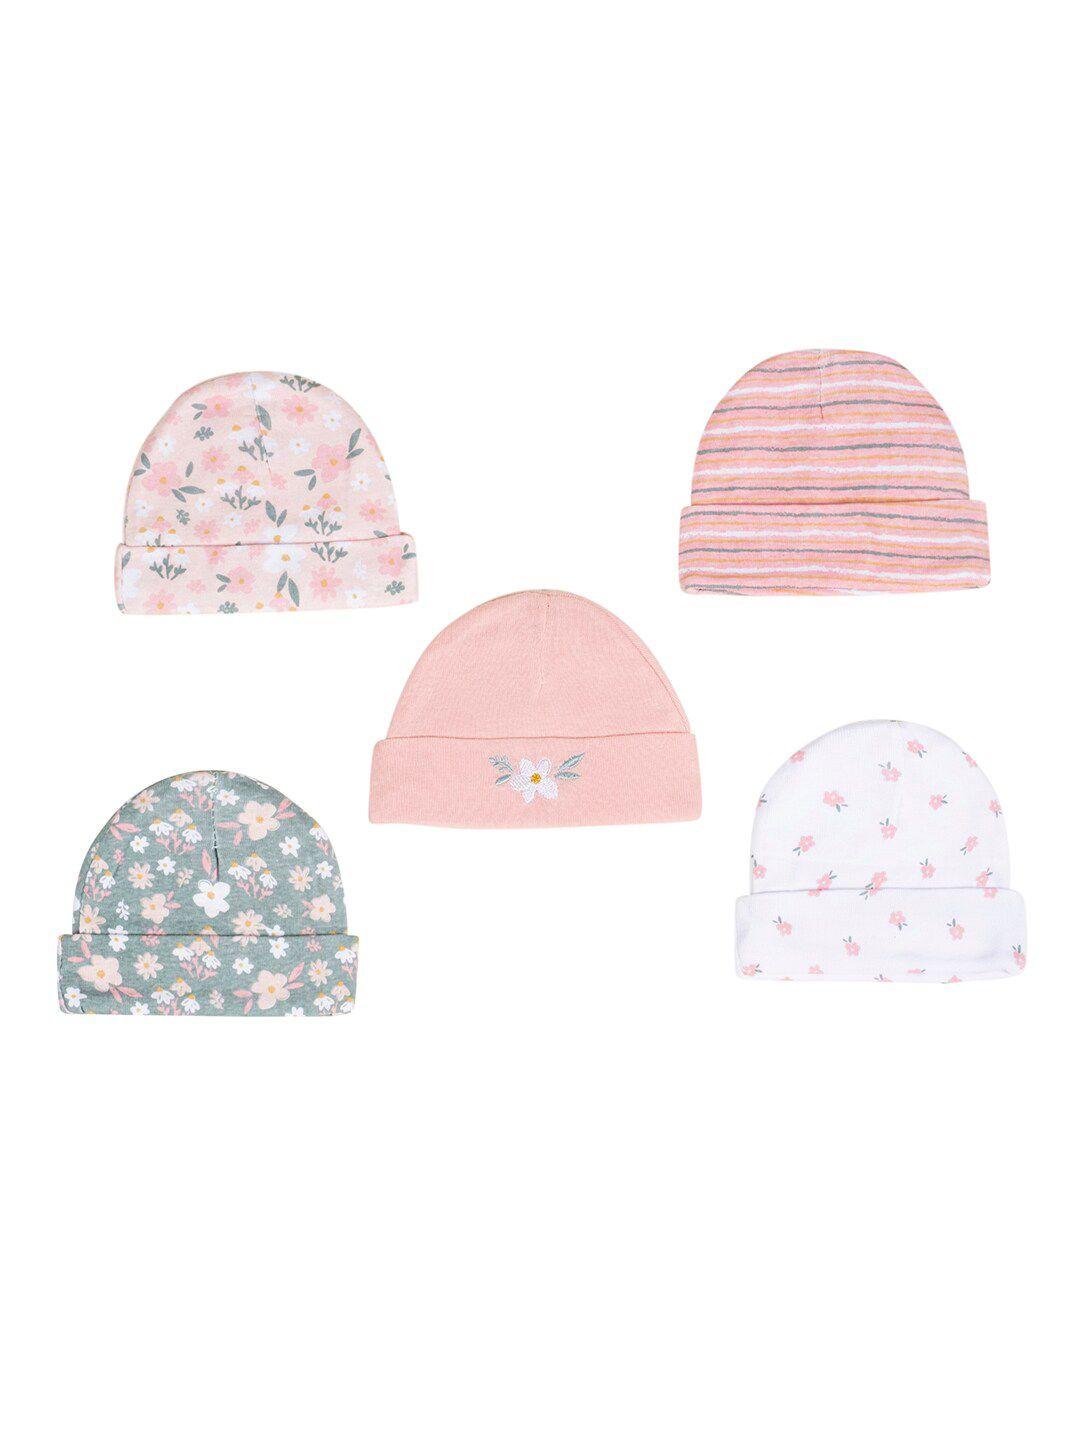 Baby Moo Infant Girls Pack of 5 Printed Pure Cotton Beanie